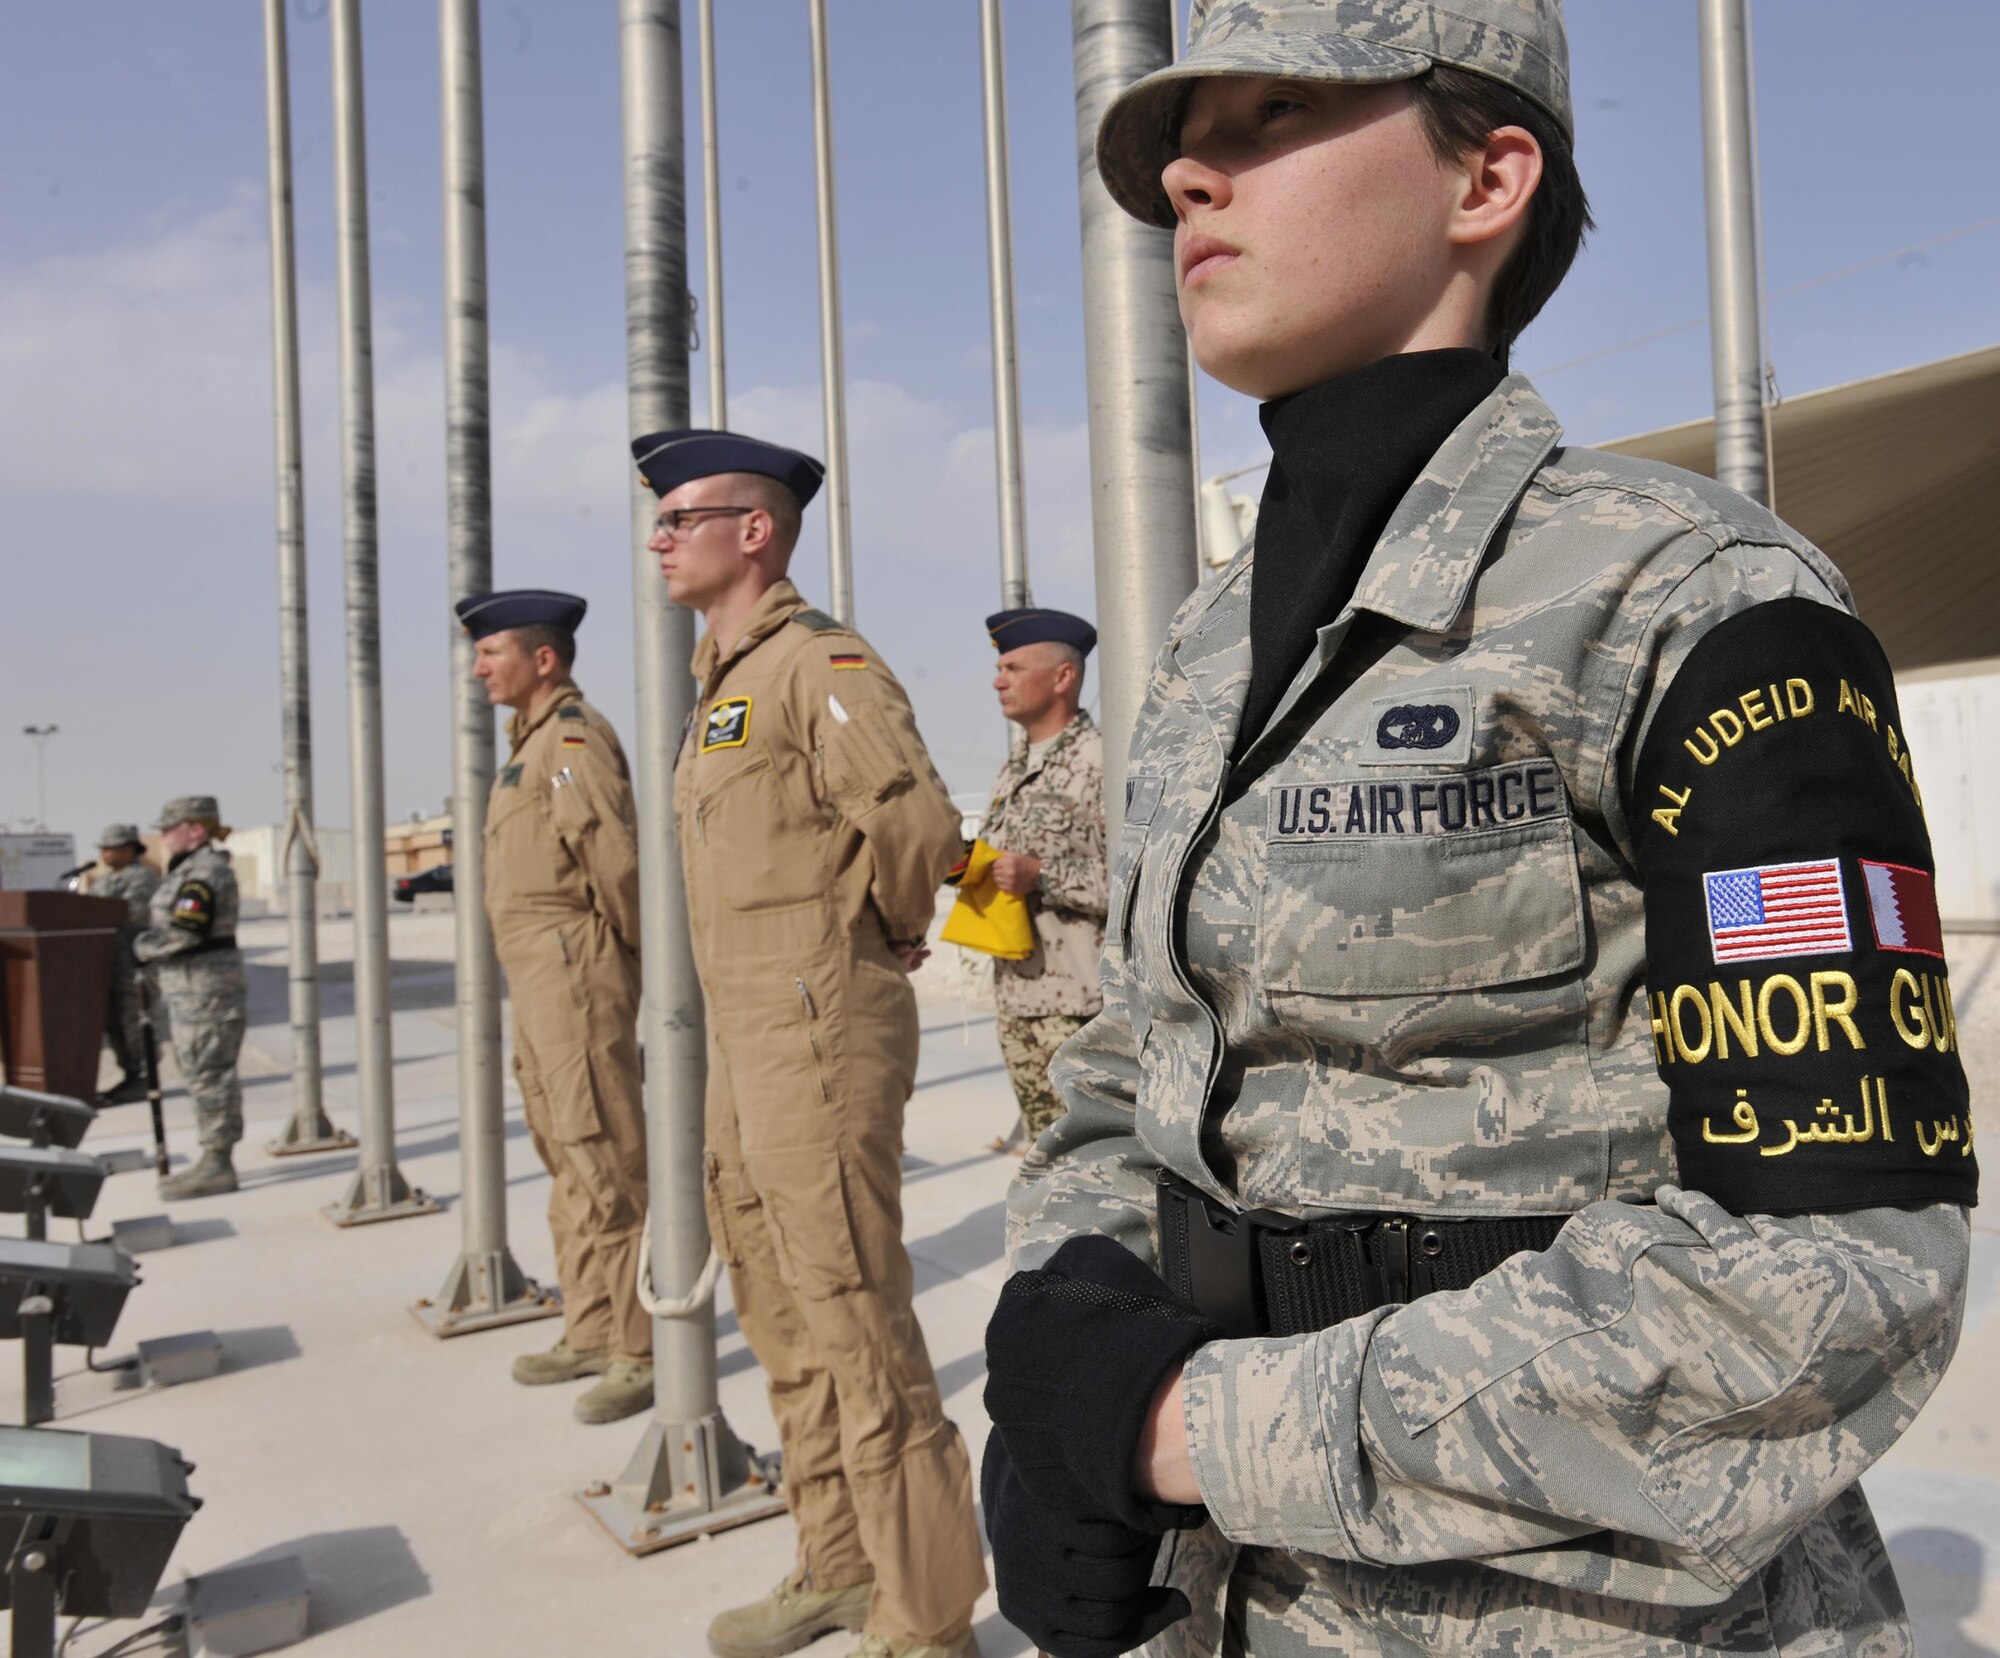 Senior Airman Nikole Warn, Al Udeid Air Base Honor Guard member, stands in position with German Air Force members during a flag raising ceremony at Al Udeid Air Base, Qatar, Feb. 8, 2016. The ceremony recognized the addition of Germany to the coalition supporting Operation Inherent Resolve. (U.S. Air Force photo by Master Sgt. Joshua Strang)